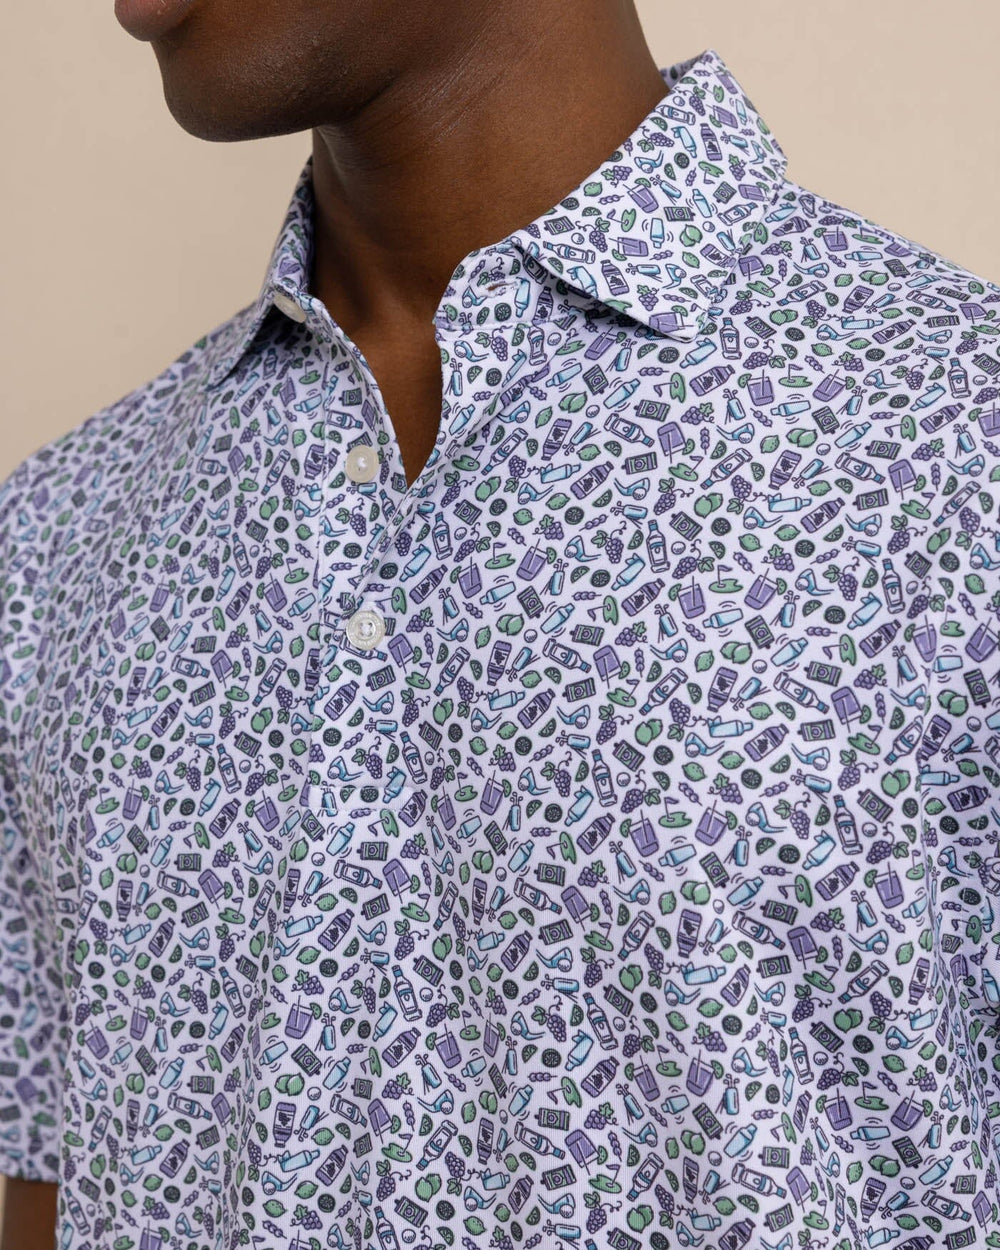 The detail view of the Southern Tide Driver Dazed and Transfused Printed Polo by Southern Tide - Classic White